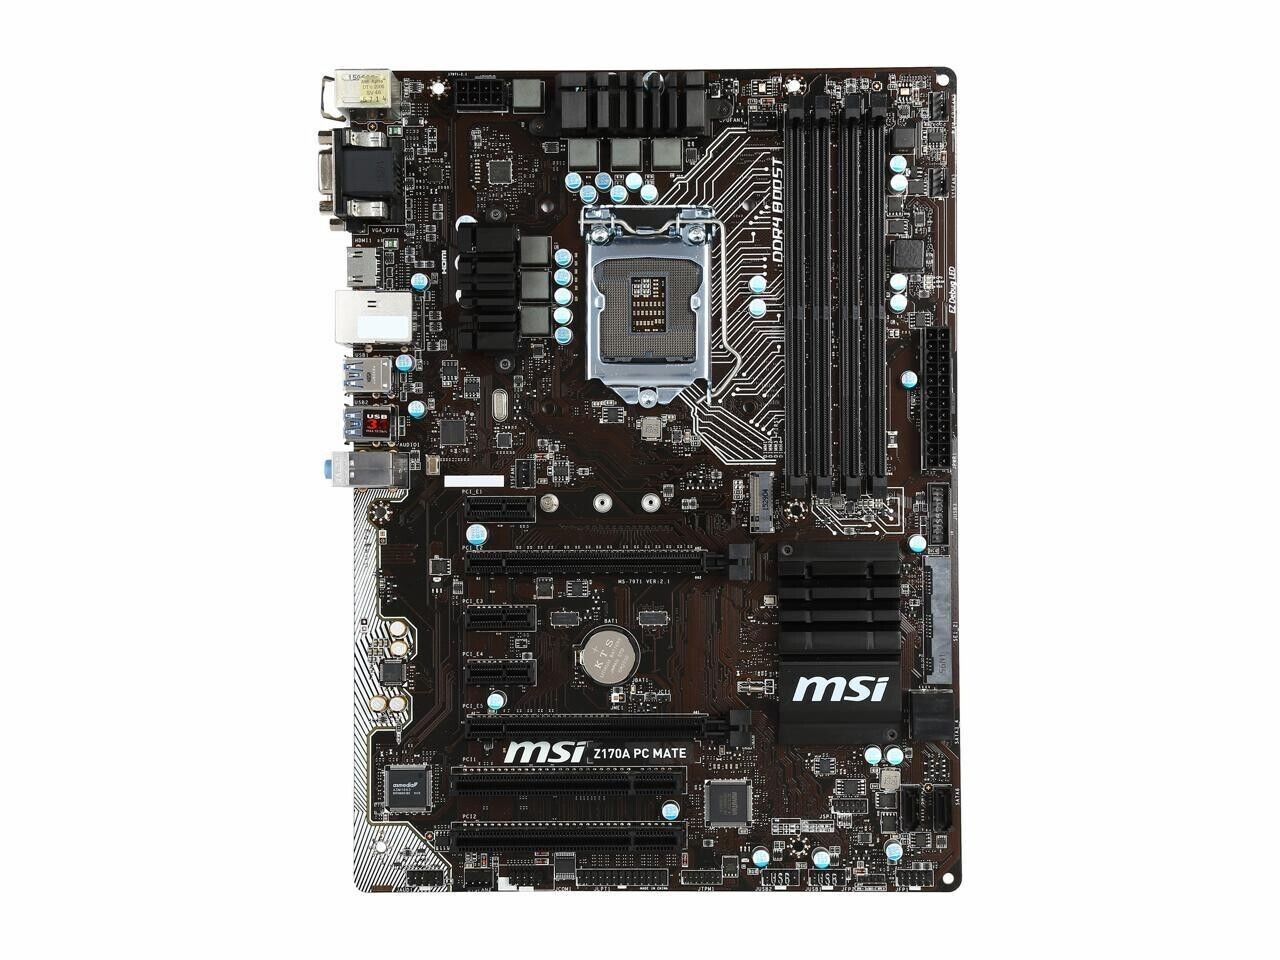 MSI Z170A PC MATE LGA 1151 Intel Z170 HDMI SATA 6Gb/s USB 3.1 ATX Motherboards